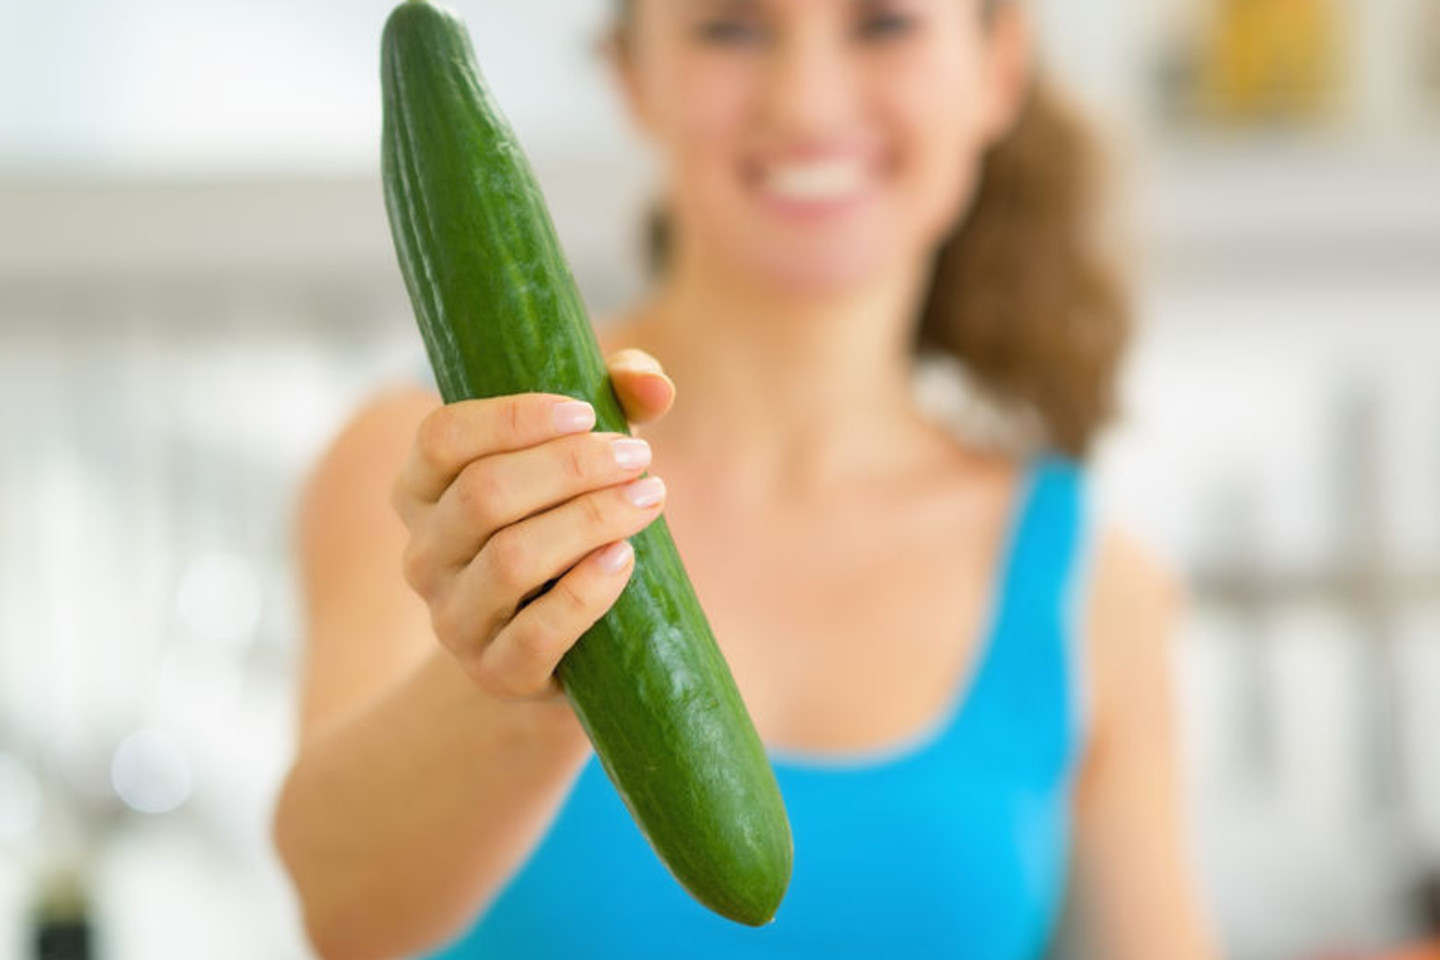 Going town with cucumber free porn photo